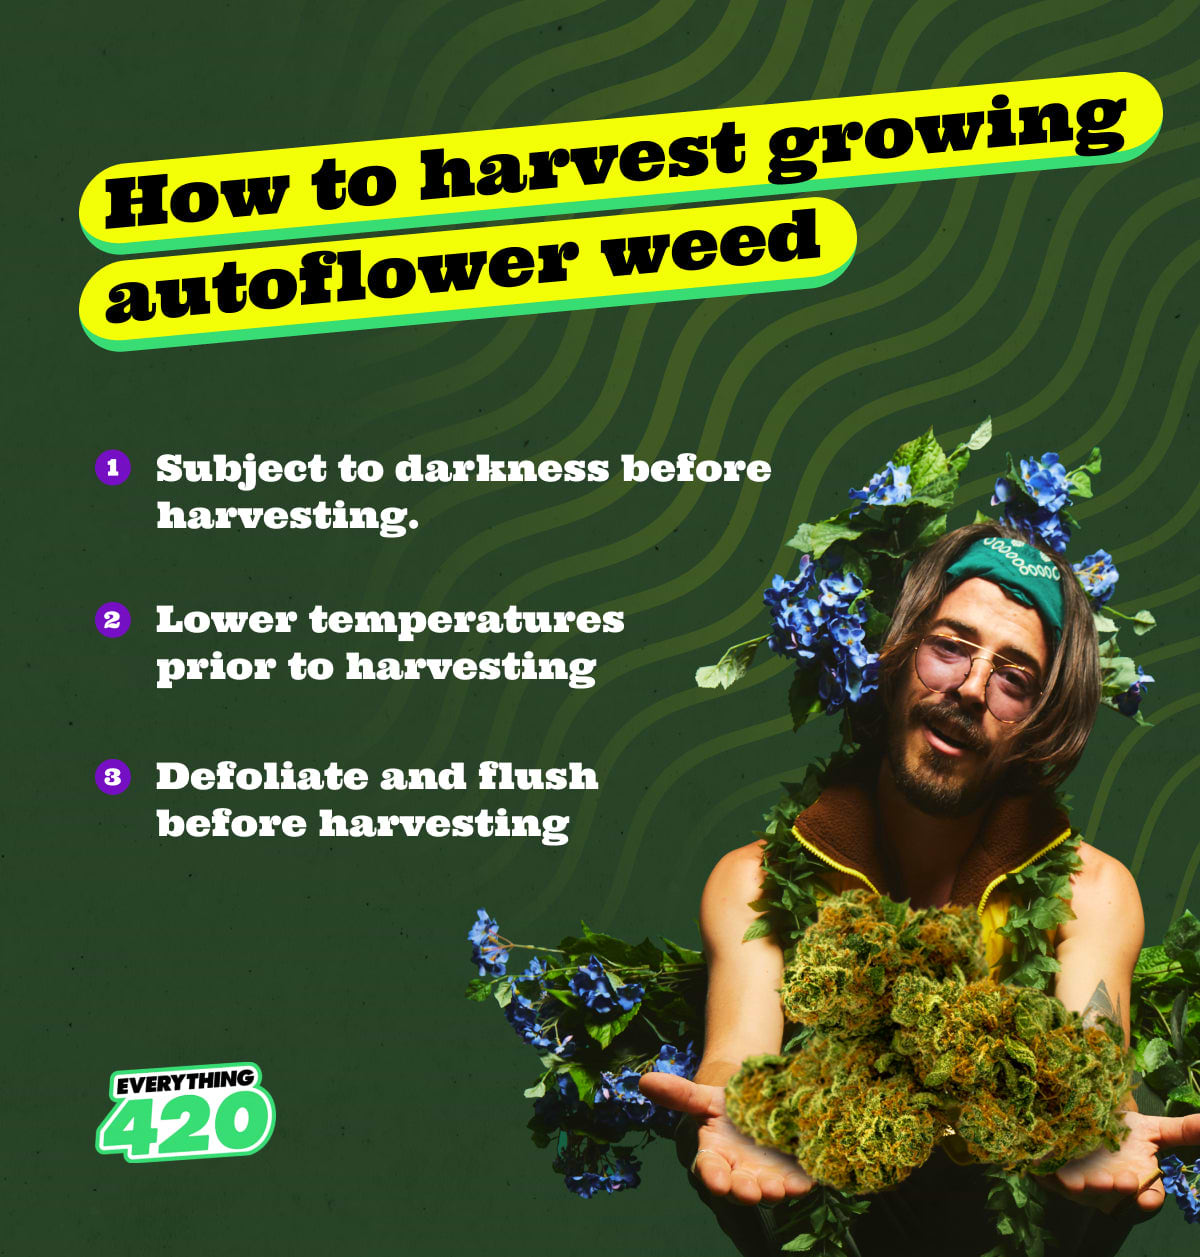 How to harvest growing autoflower weed